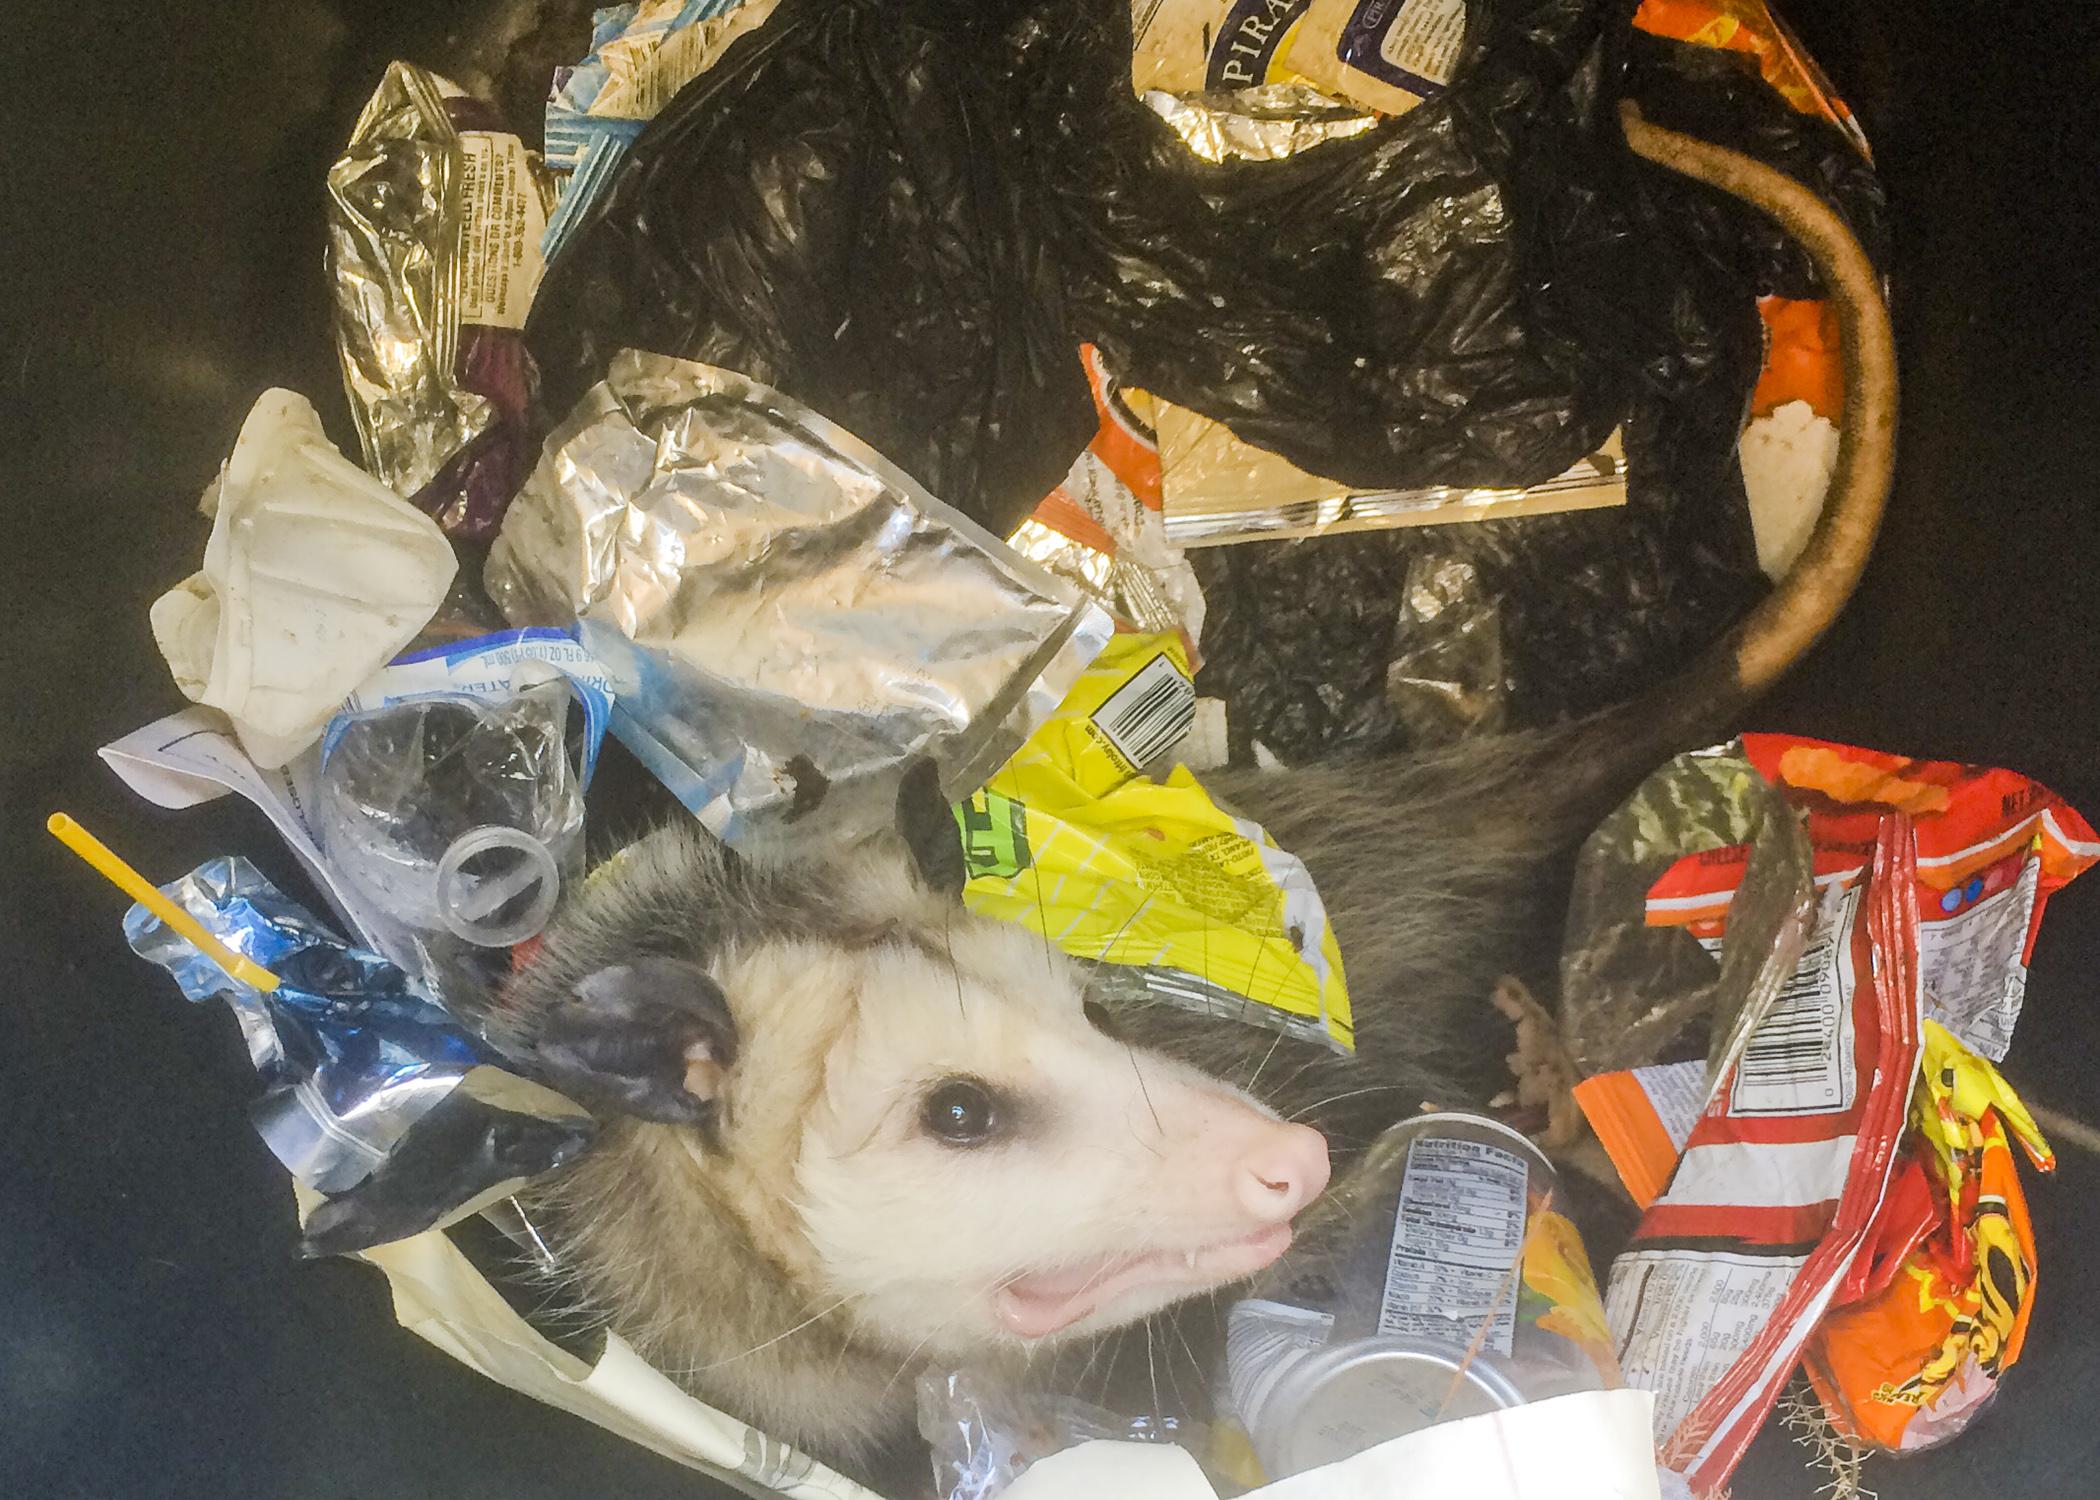 Opossums that live near people may visit vegetable gardens, compost piles, pet food dishes or garbage cans such as this one. (Photo by MSU Extension/Evan O’Donnell)